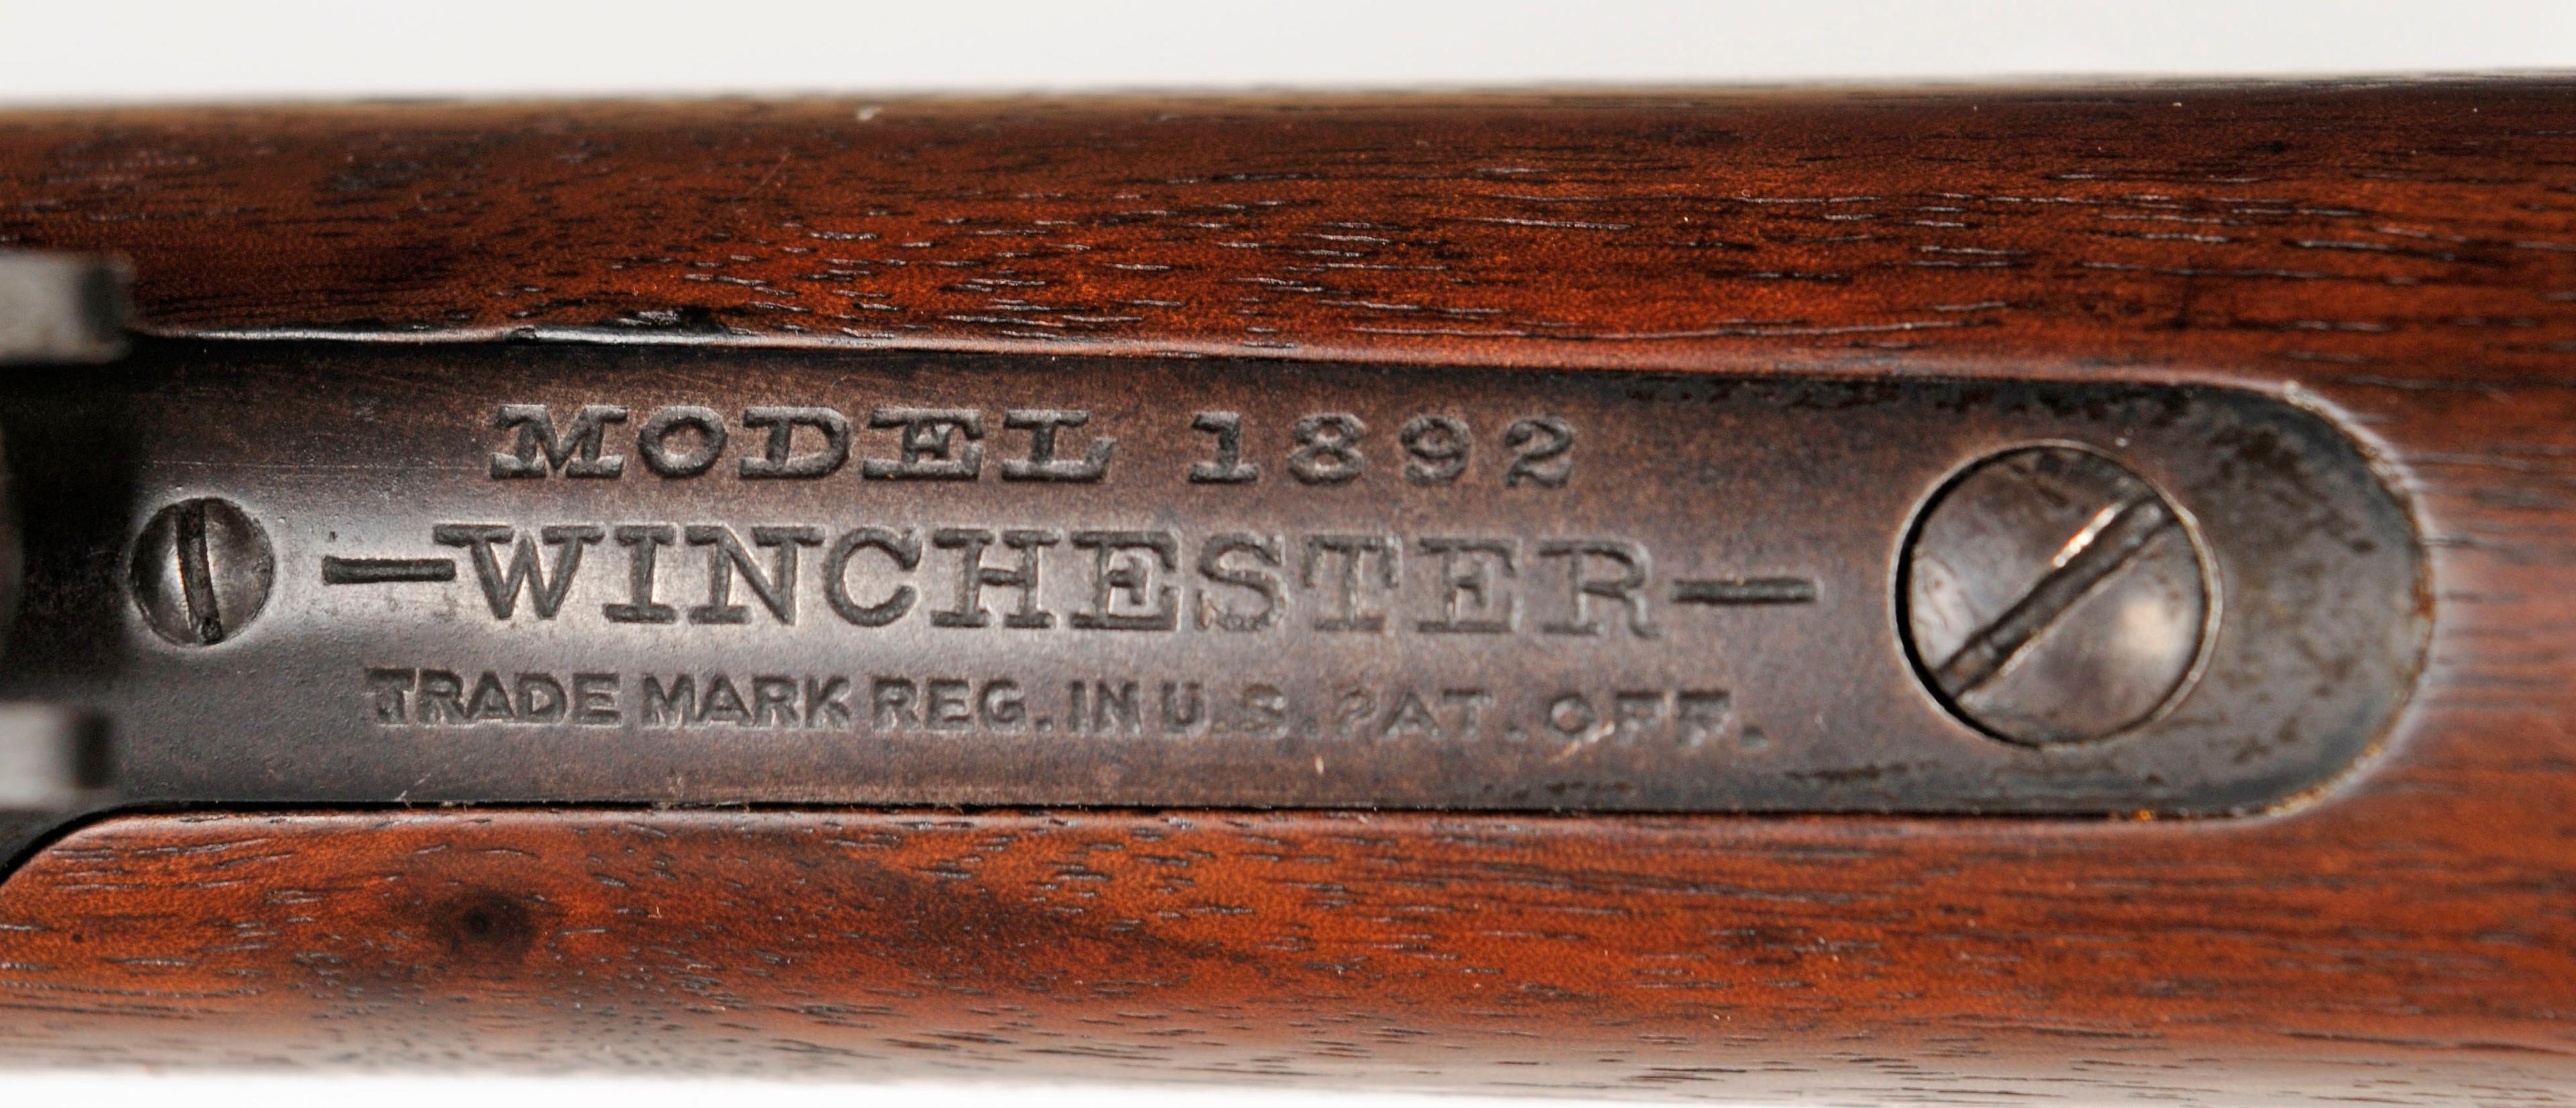 Winchester Model 1892 .25-20 Lever-Action Rifle - FFL # 510434 (NBV1)